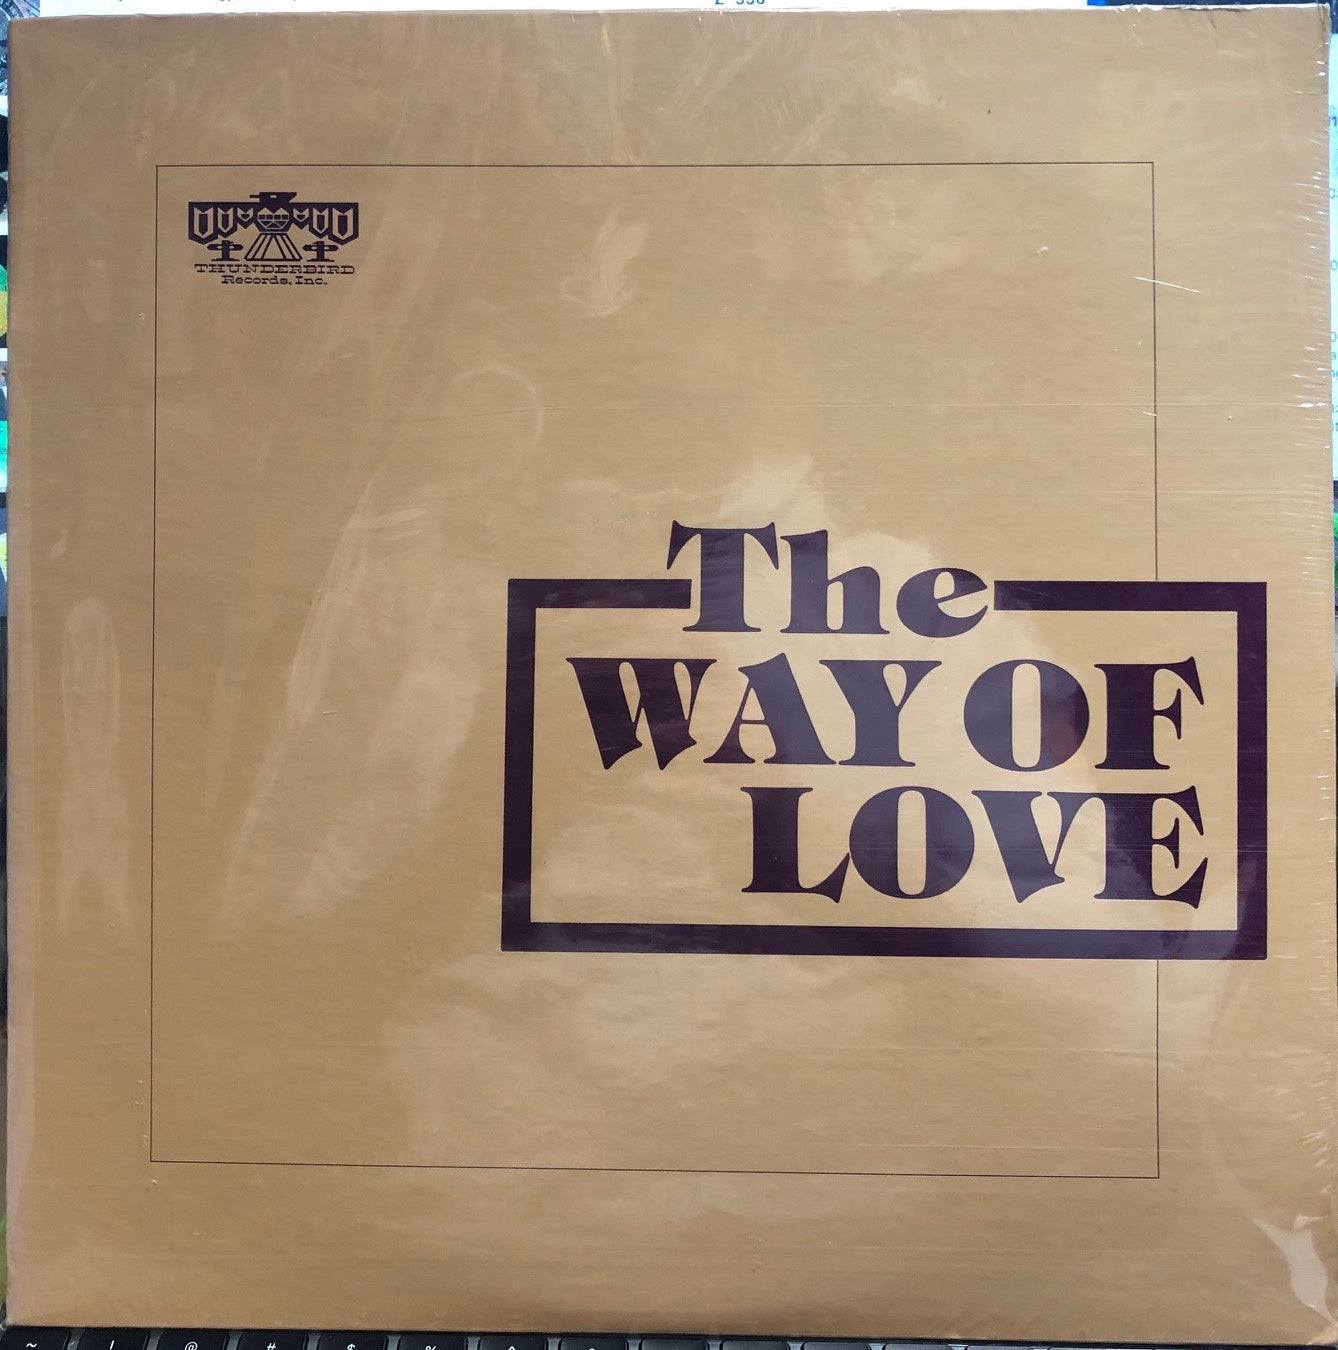 The Way Of Love – The Way Of Love - New LP Record 1981 Thunderbird Private Press Outsider USA Vinyl - Soft Rock / Xian Rock